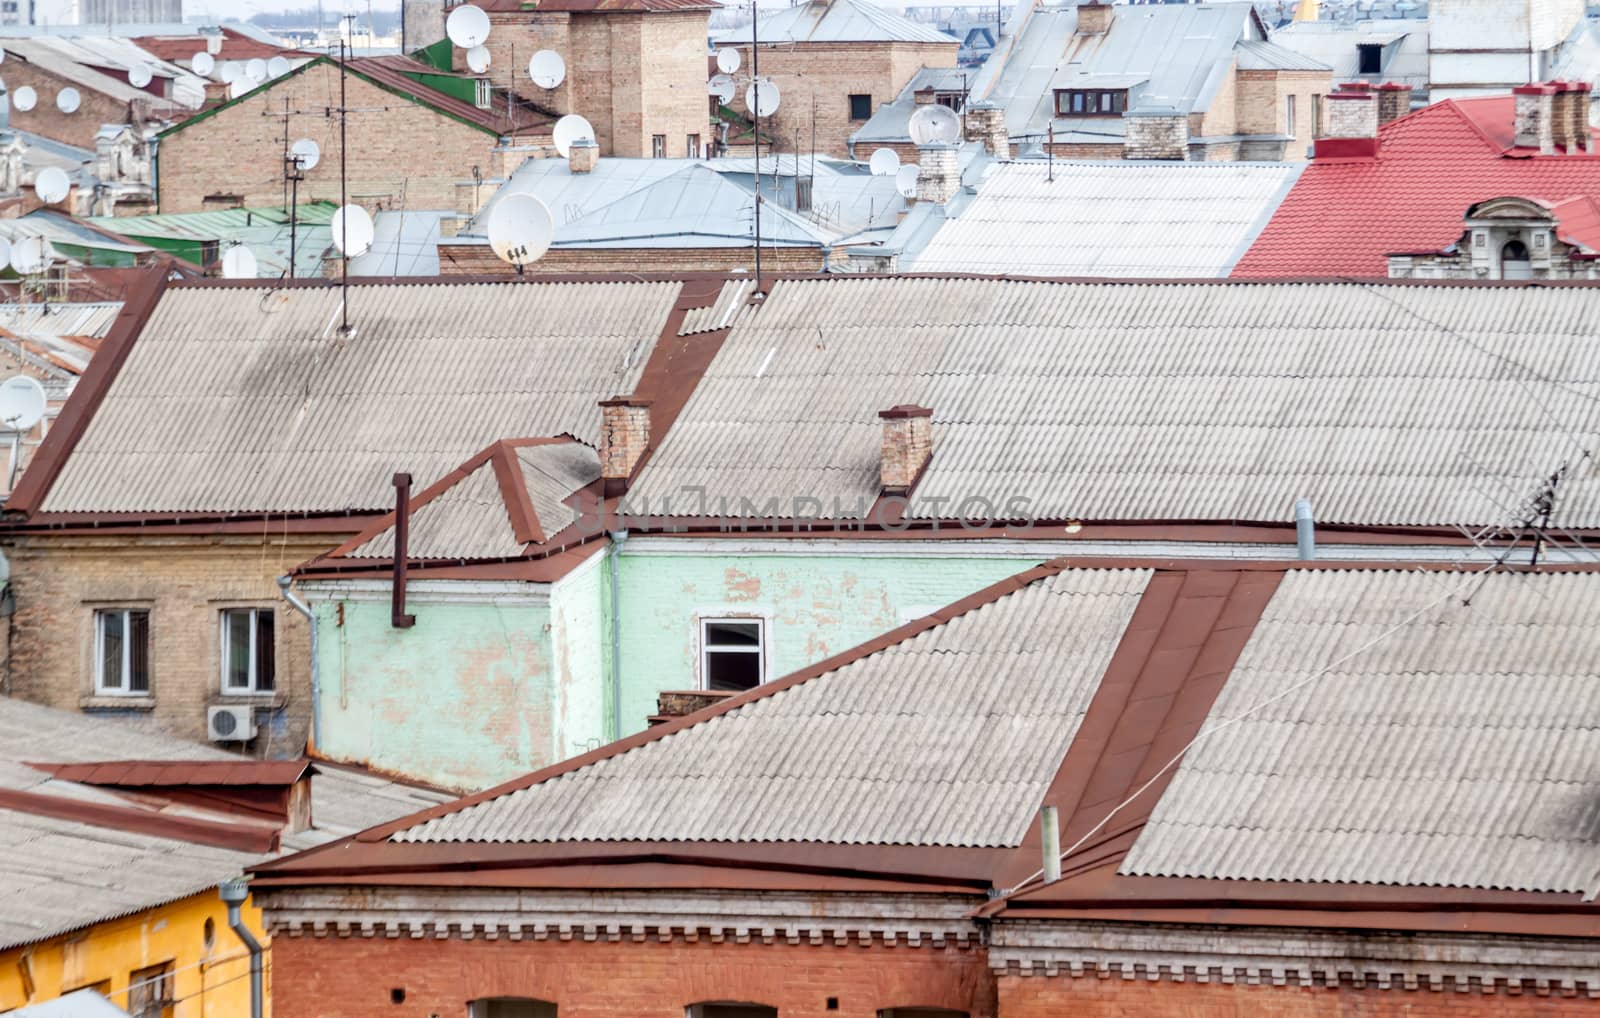 old roofs with dish antennas by Chechotkin